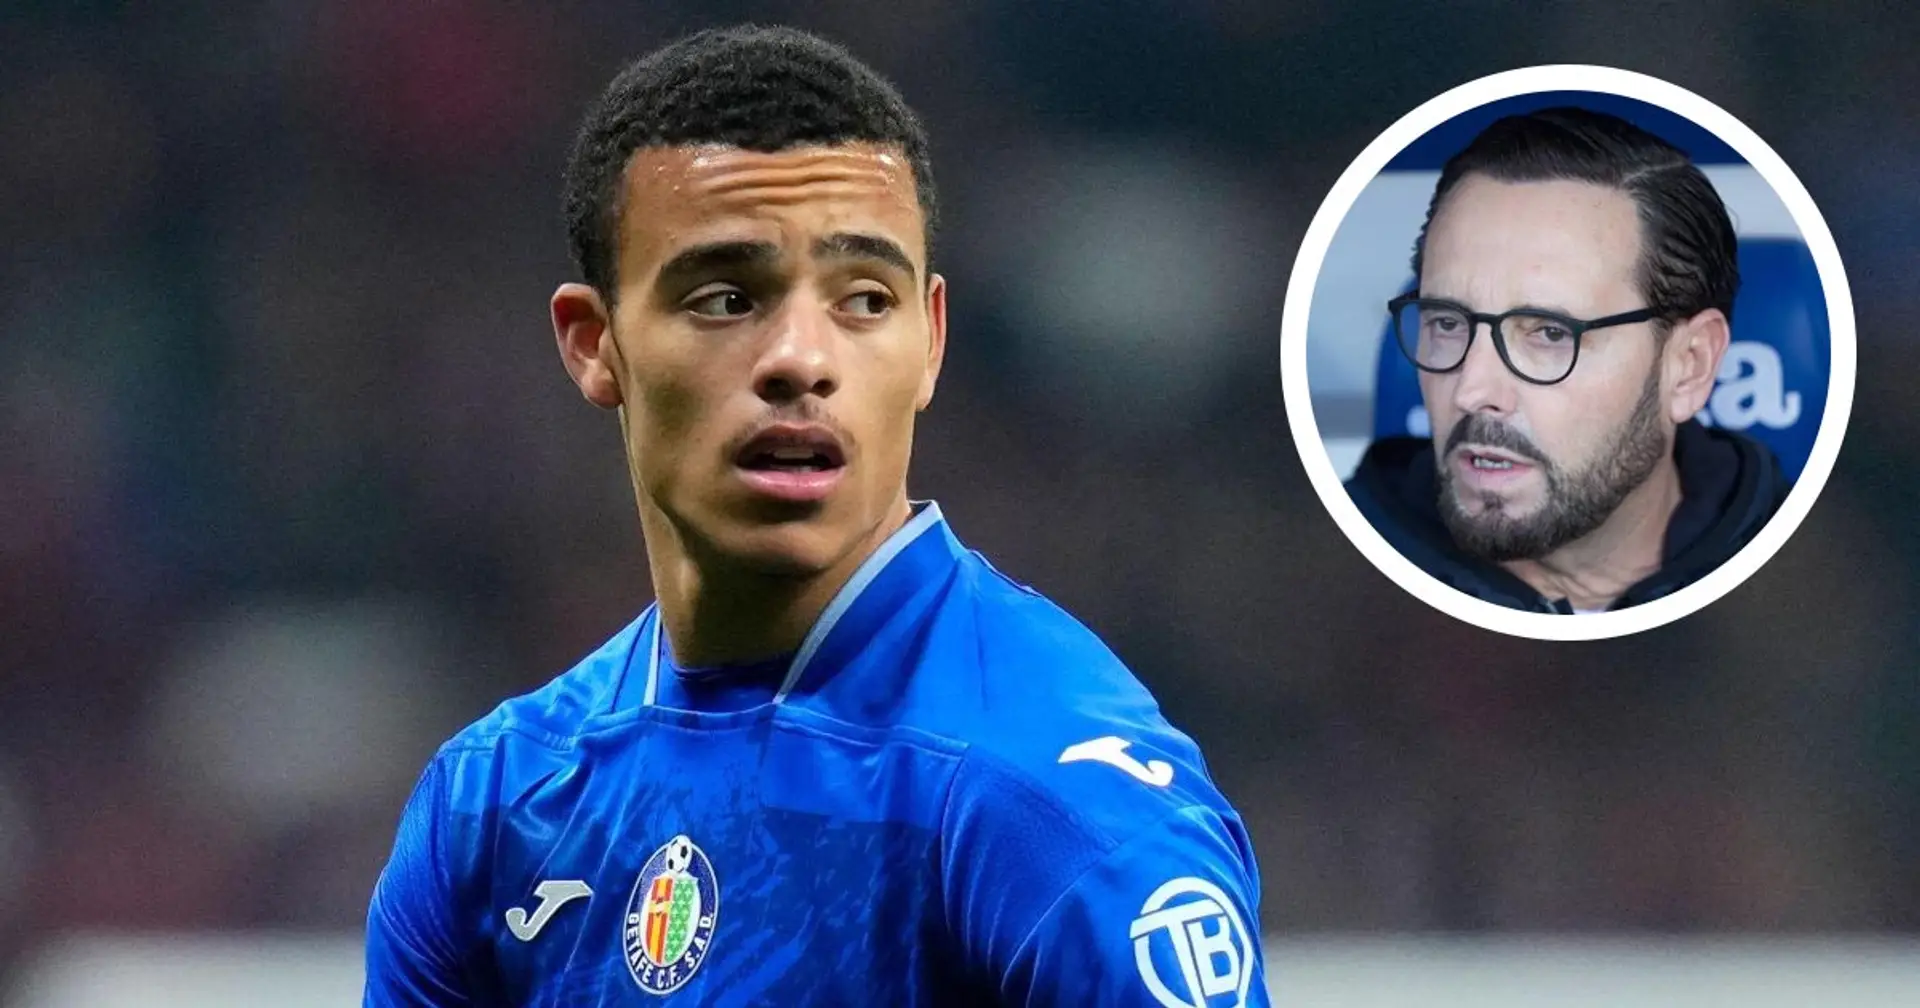 ‘We are happy with his behaviour’: Getafe manager gives new update on Greenwood's future